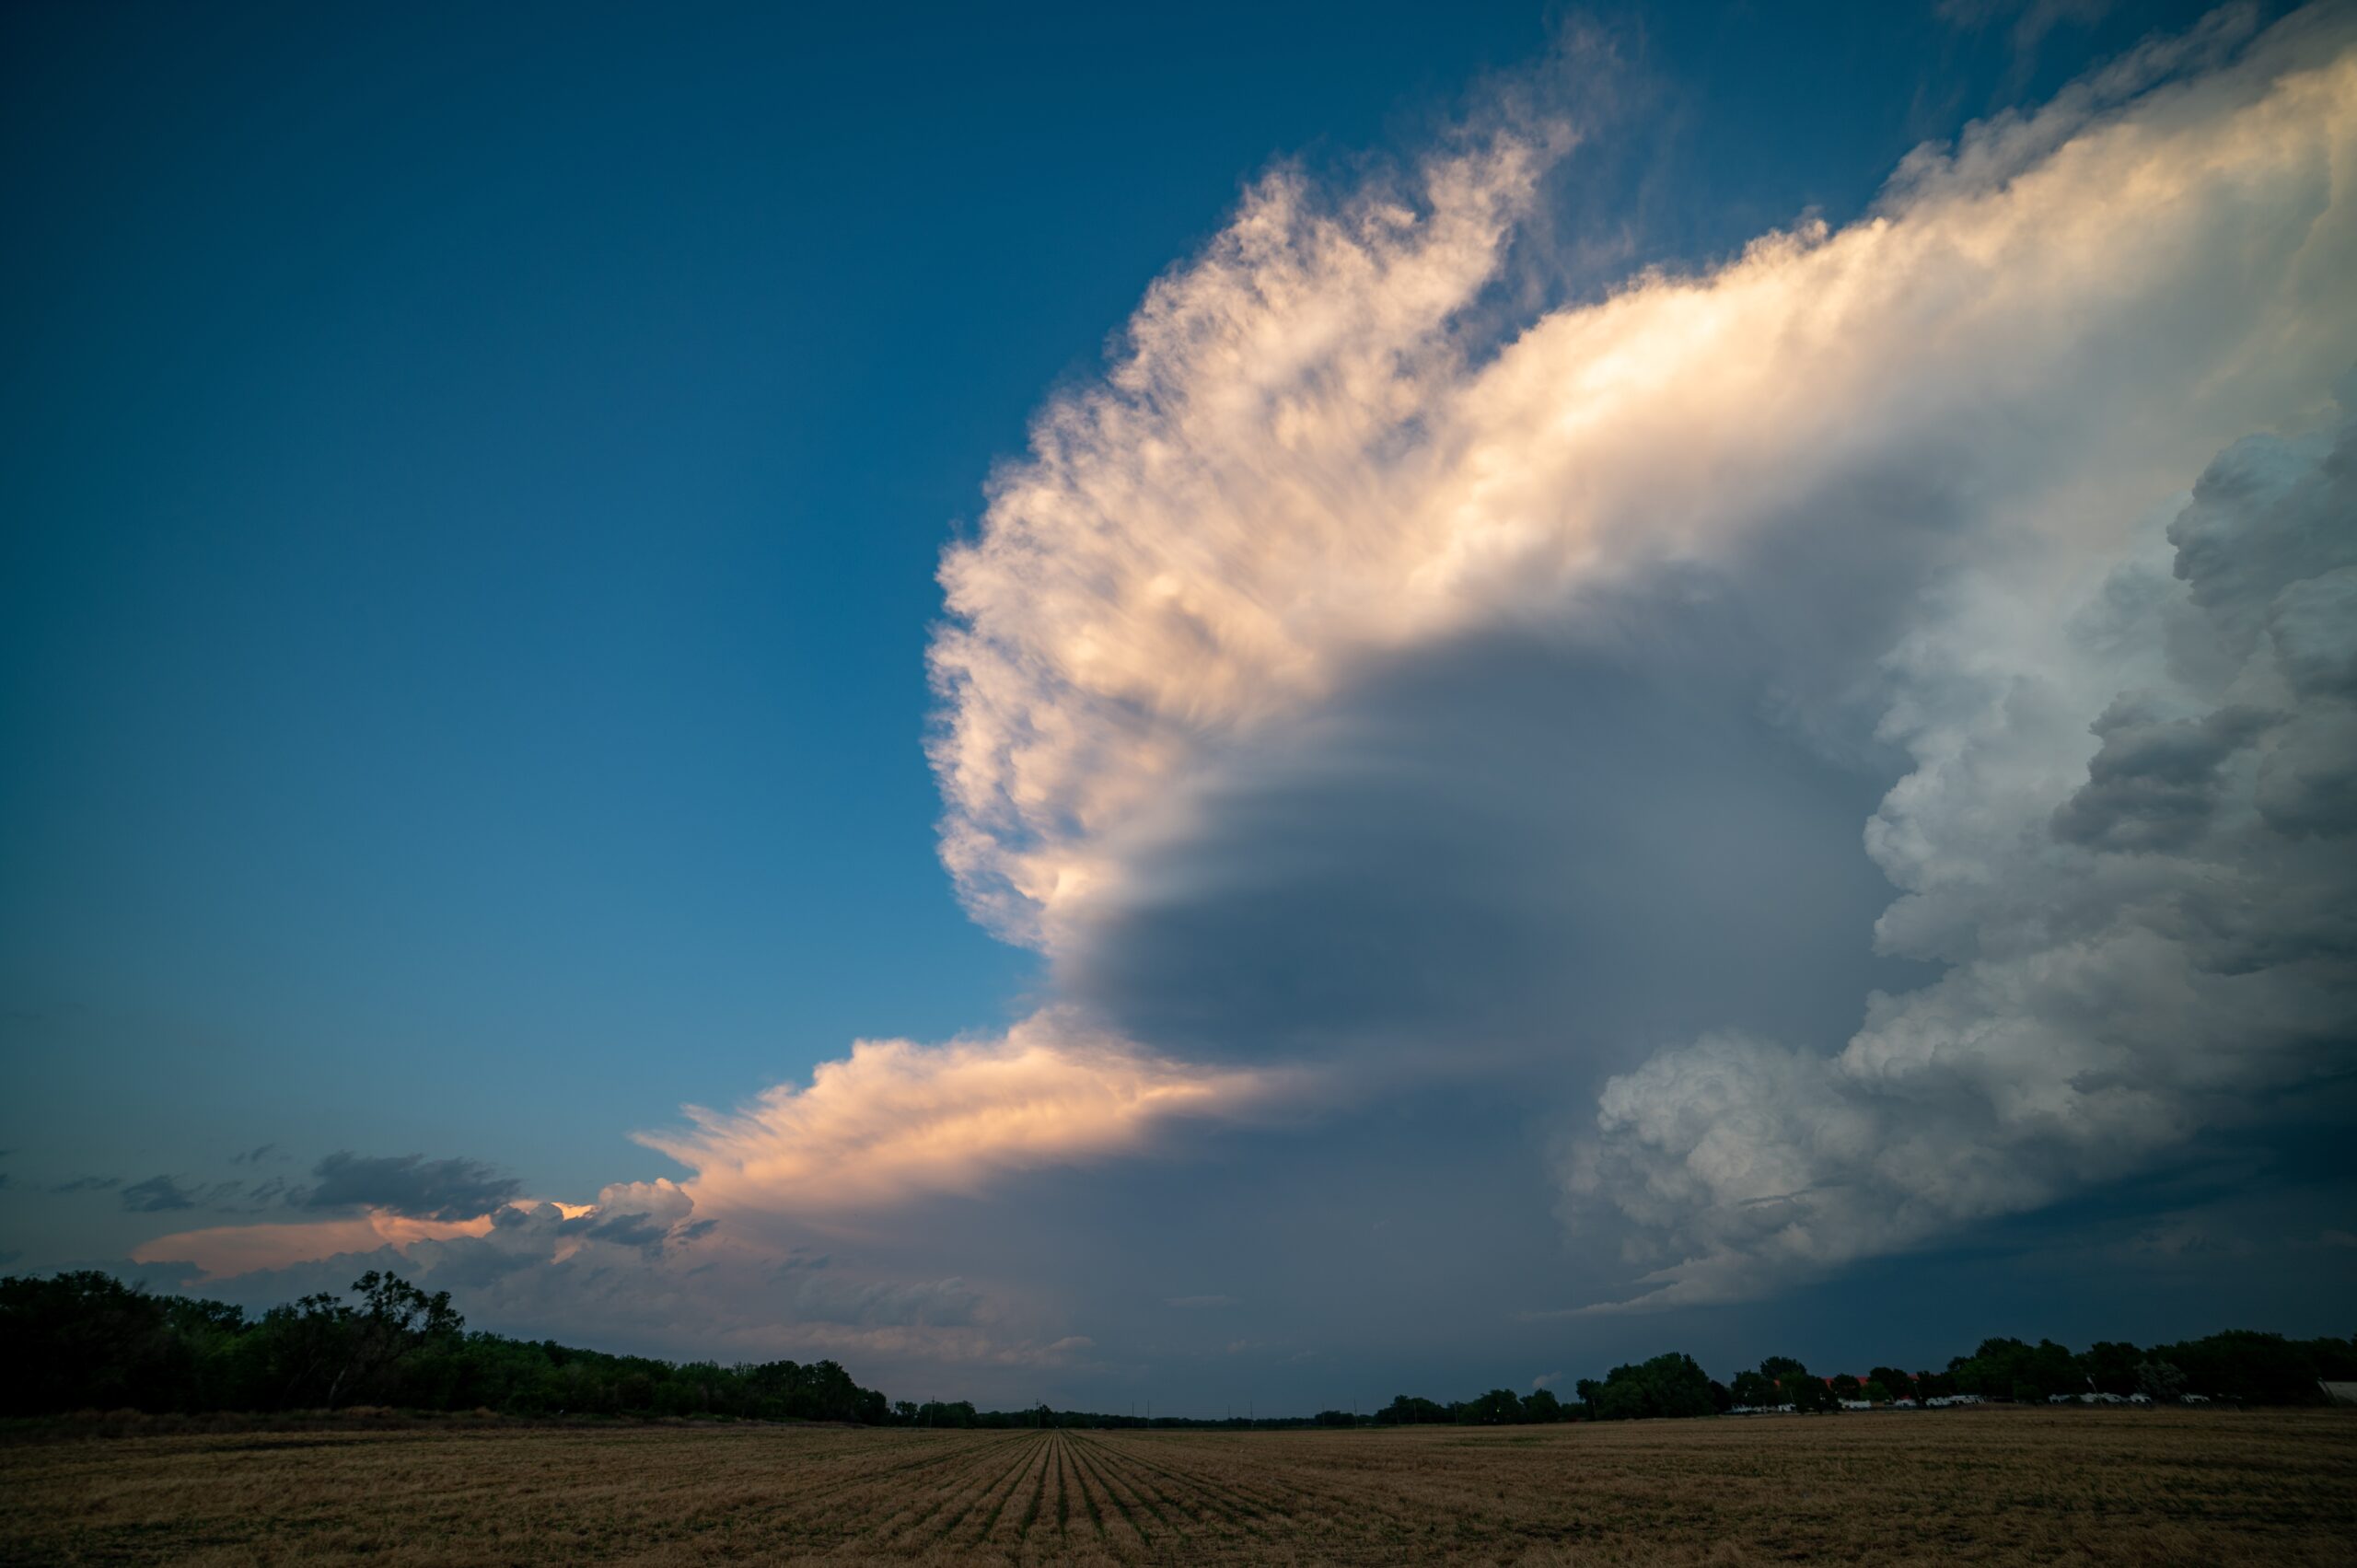 Supercell,Thunderstorm,Over,Corn,Field,In,Nebraska,Giant,Clouds